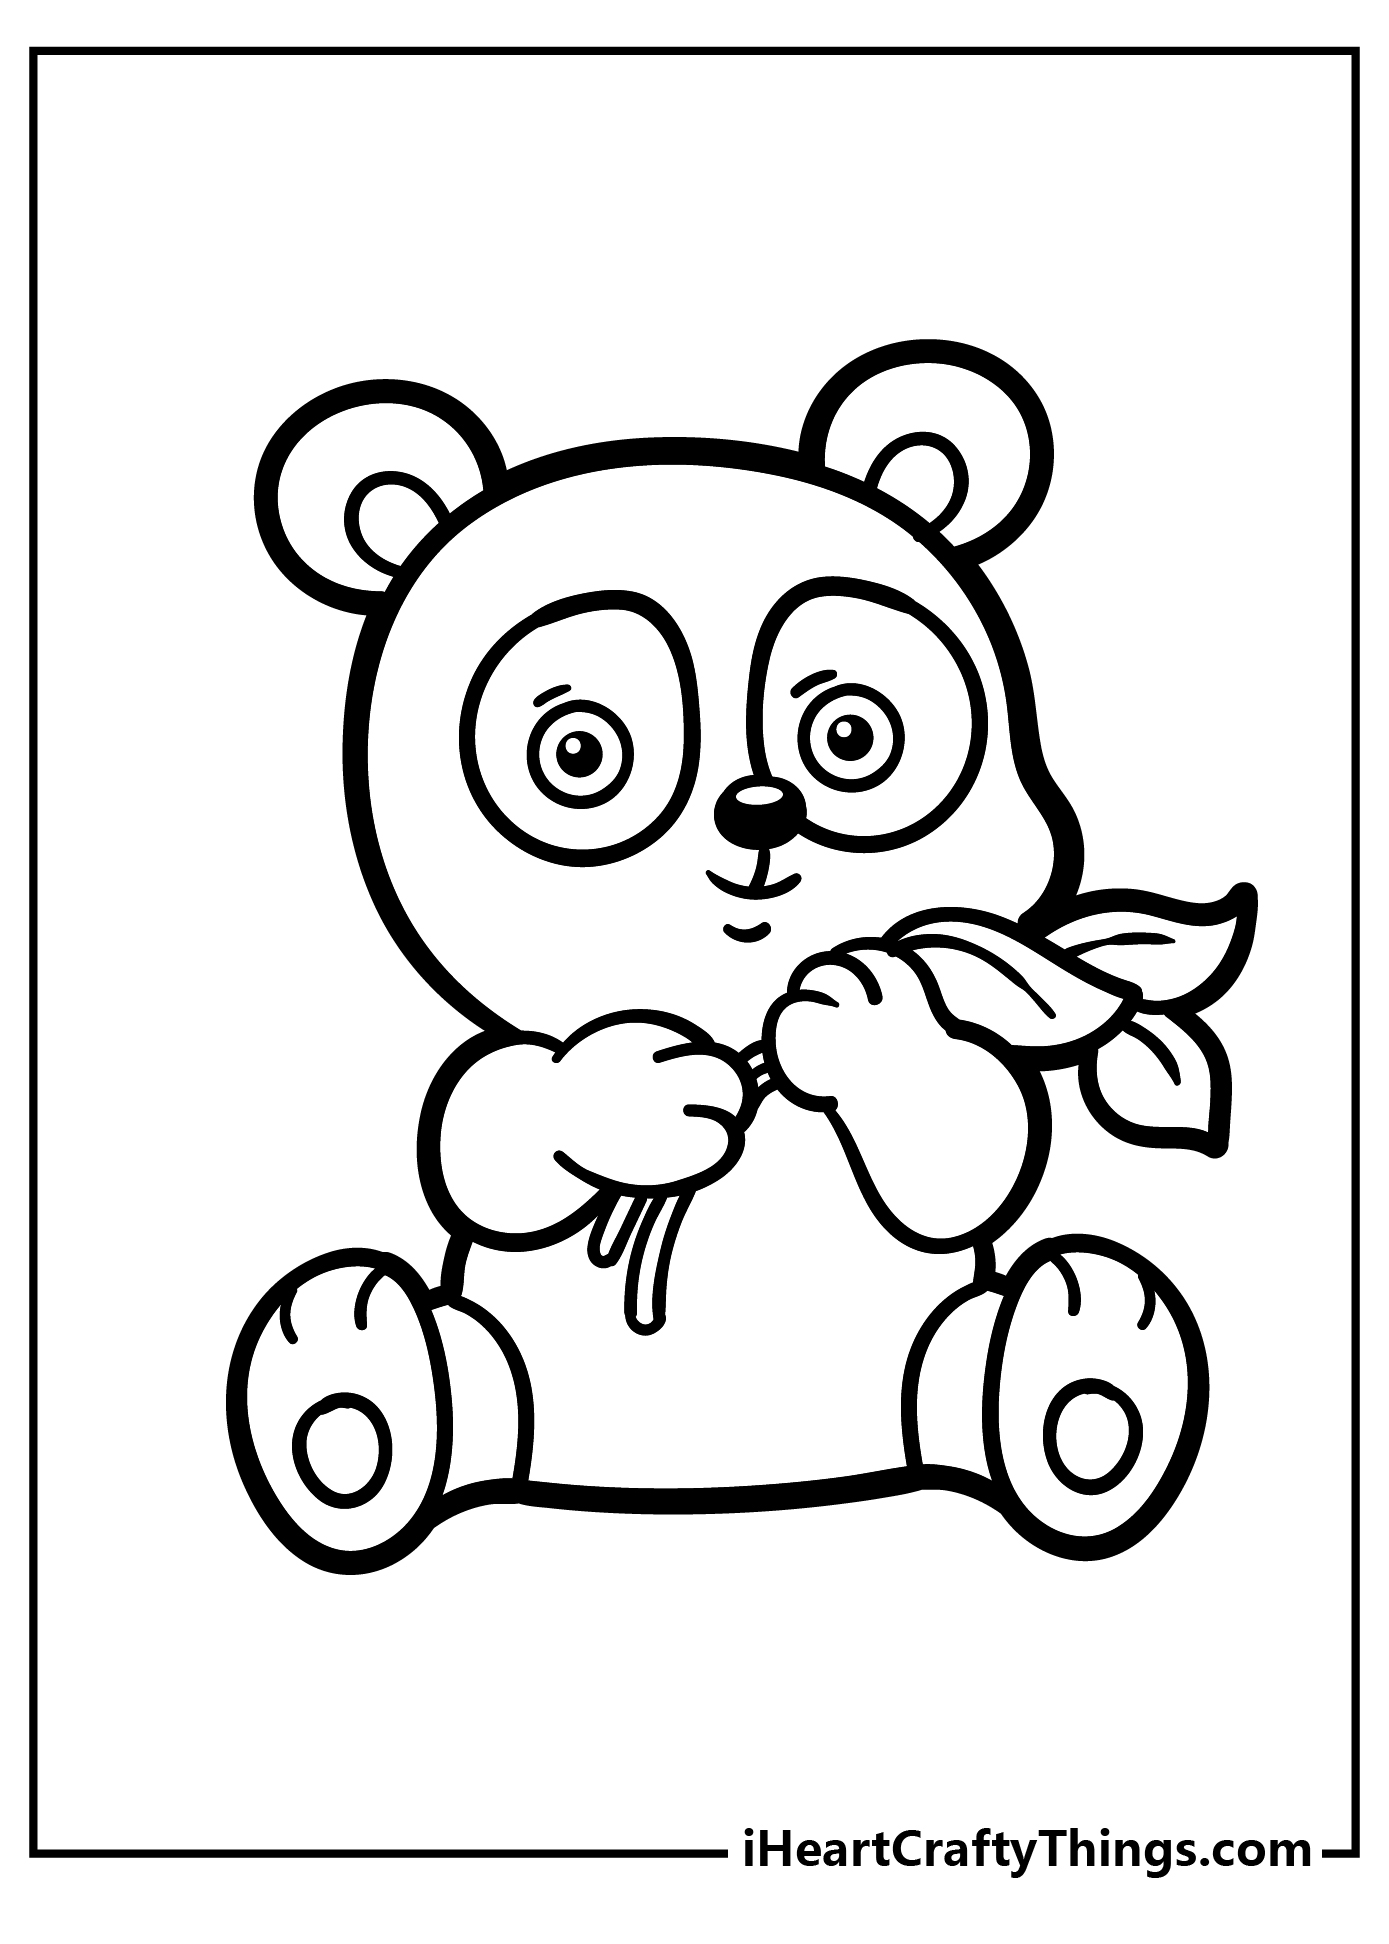 Panda Coloring Pages for adults free printable